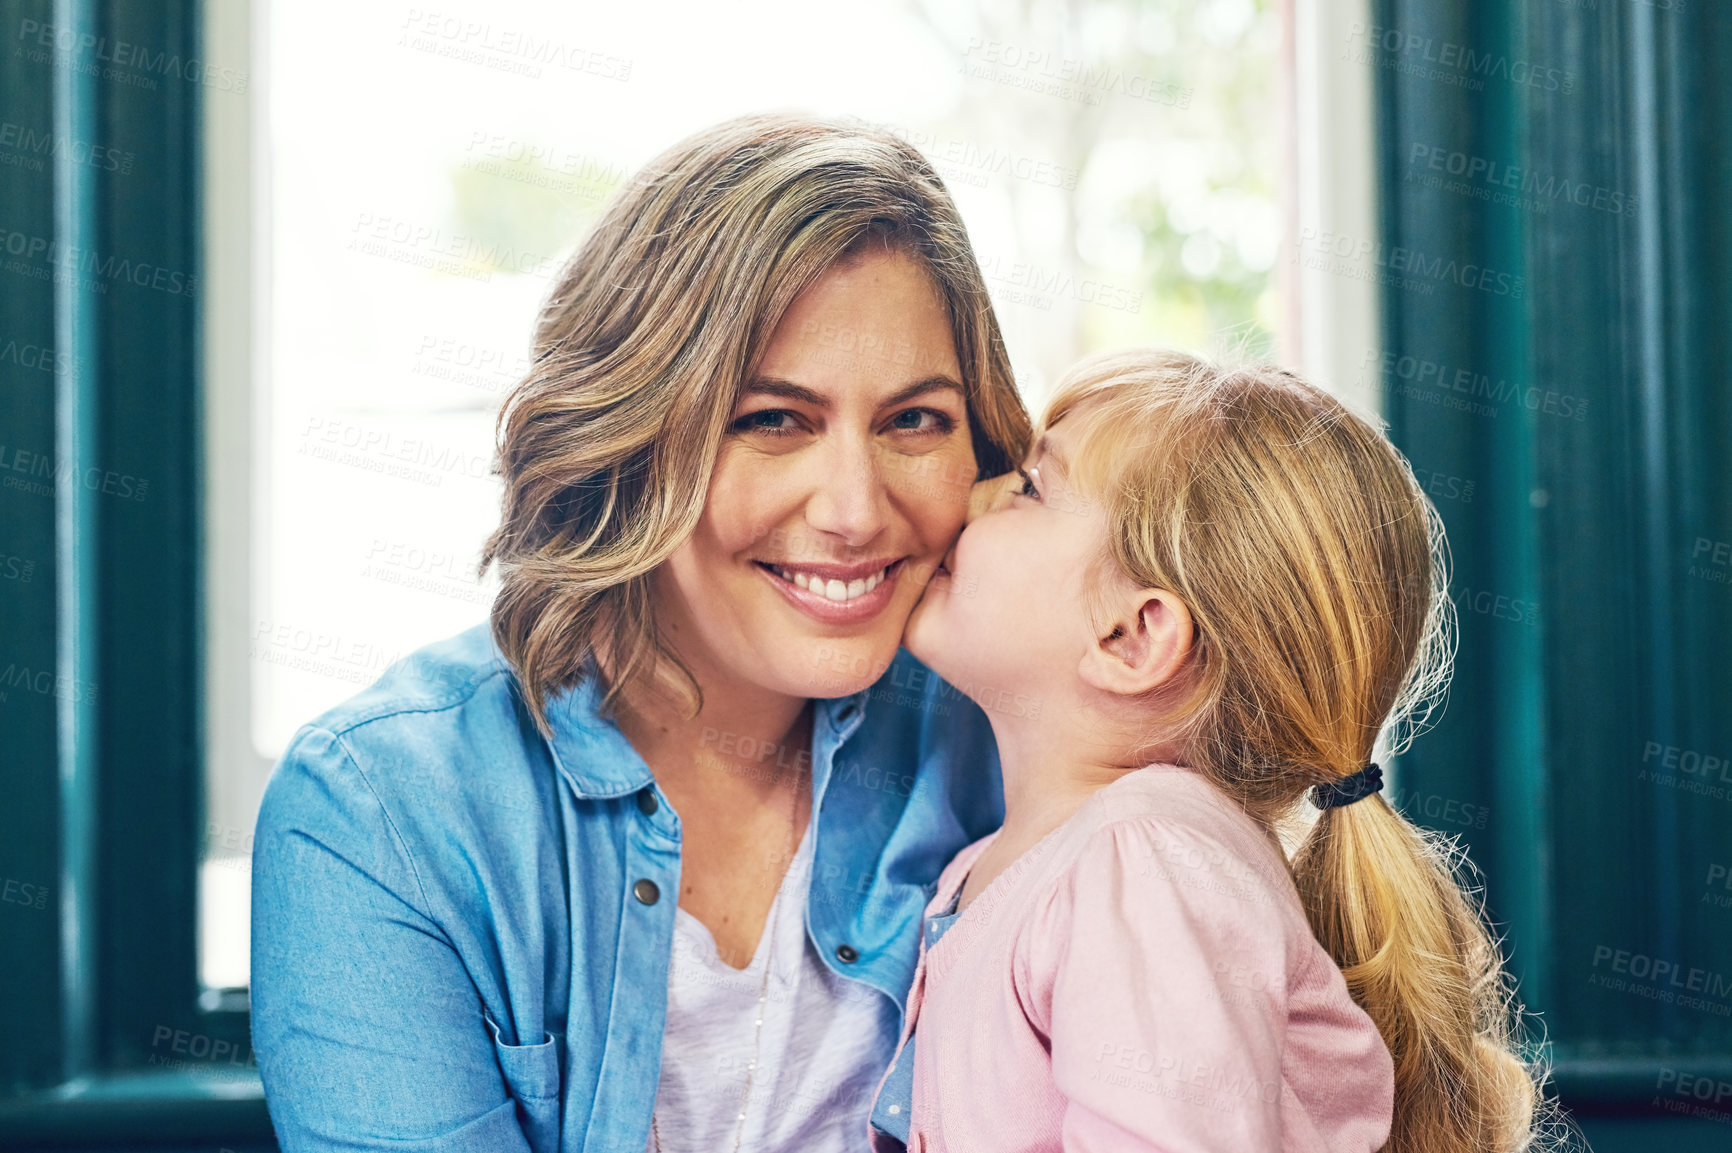 Buy stock photo Portrait of a cheerful young mother receiving a kiss on the cheek by her young little daughter